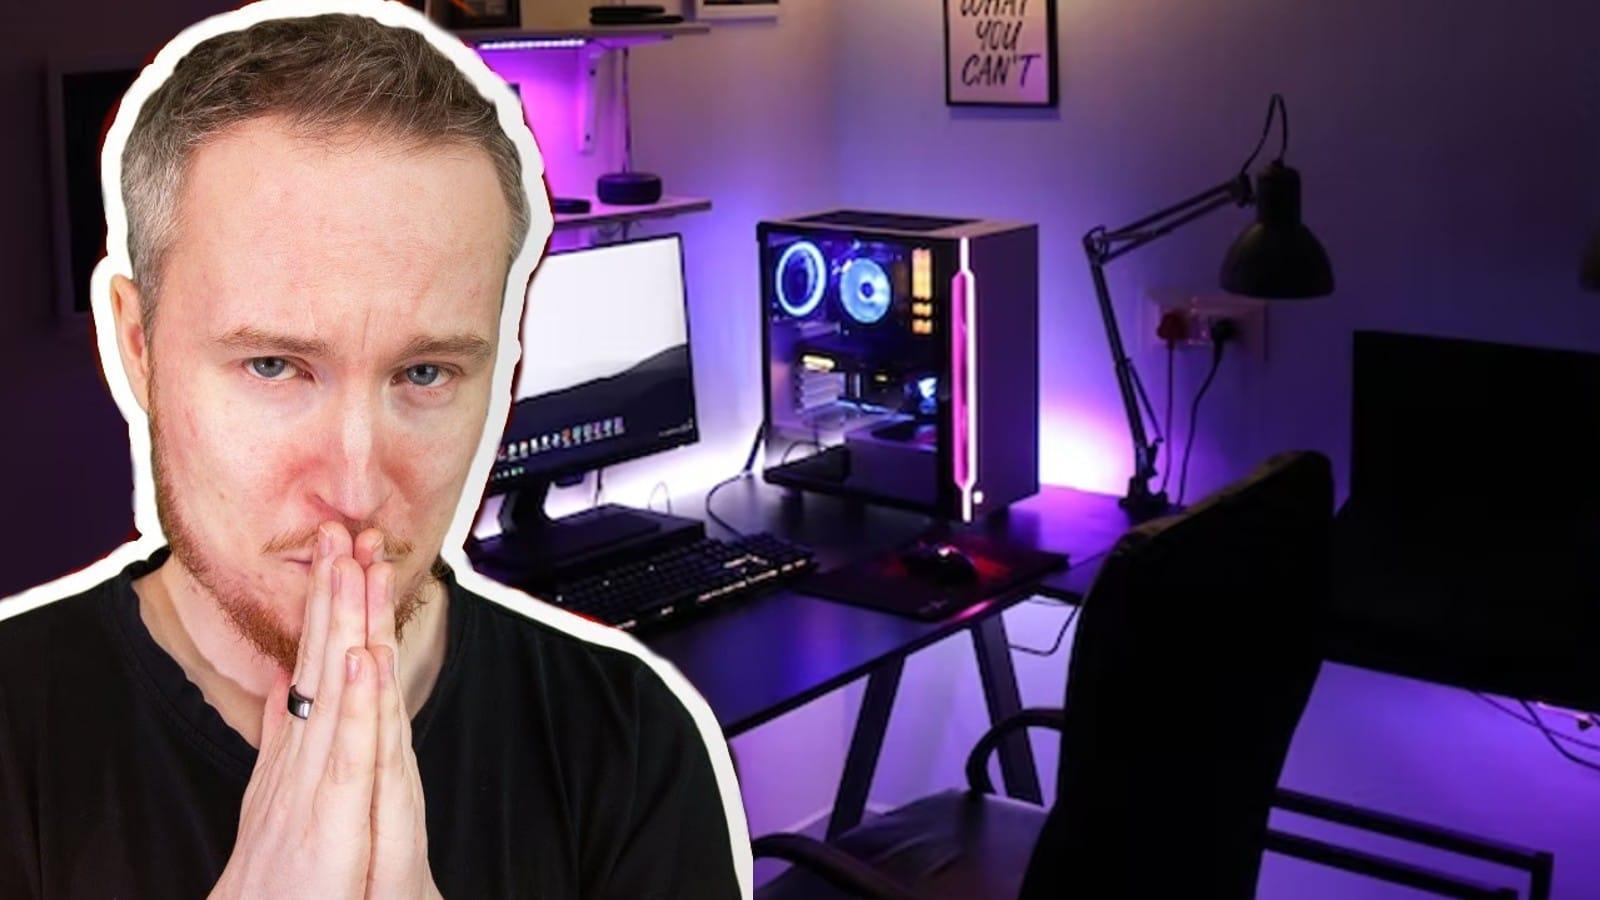 Twitch streamer jorbs claims he finds streaming to thousands of views "unbearable"